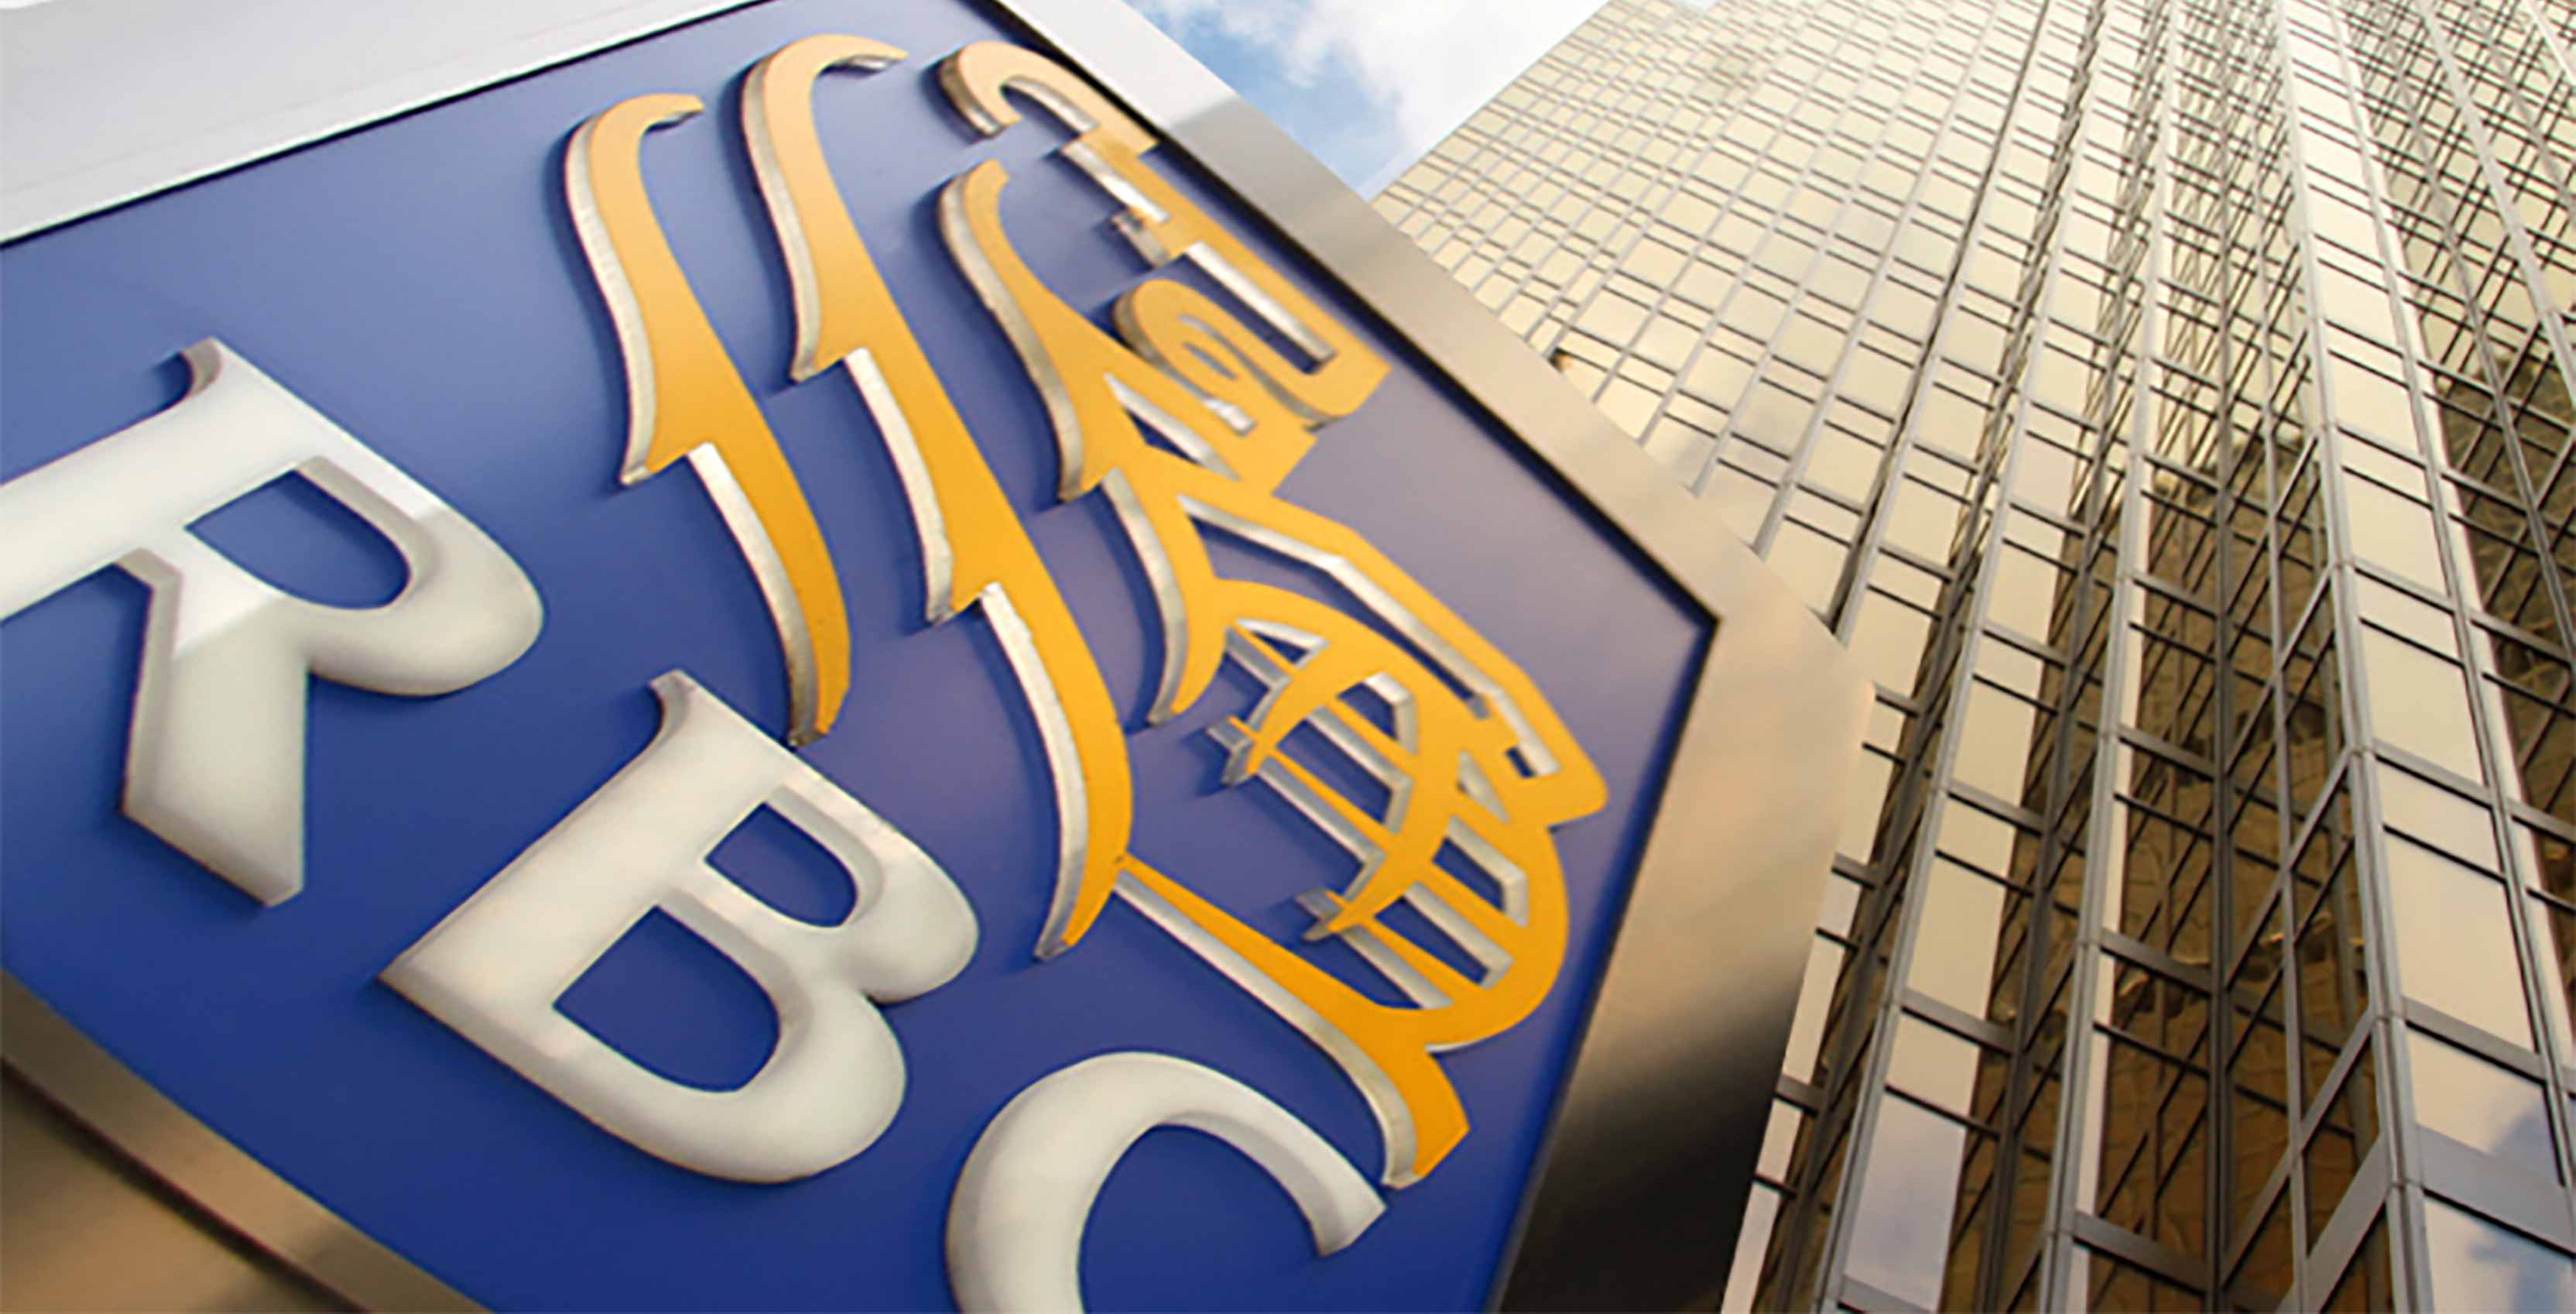 RBC sign in front of building